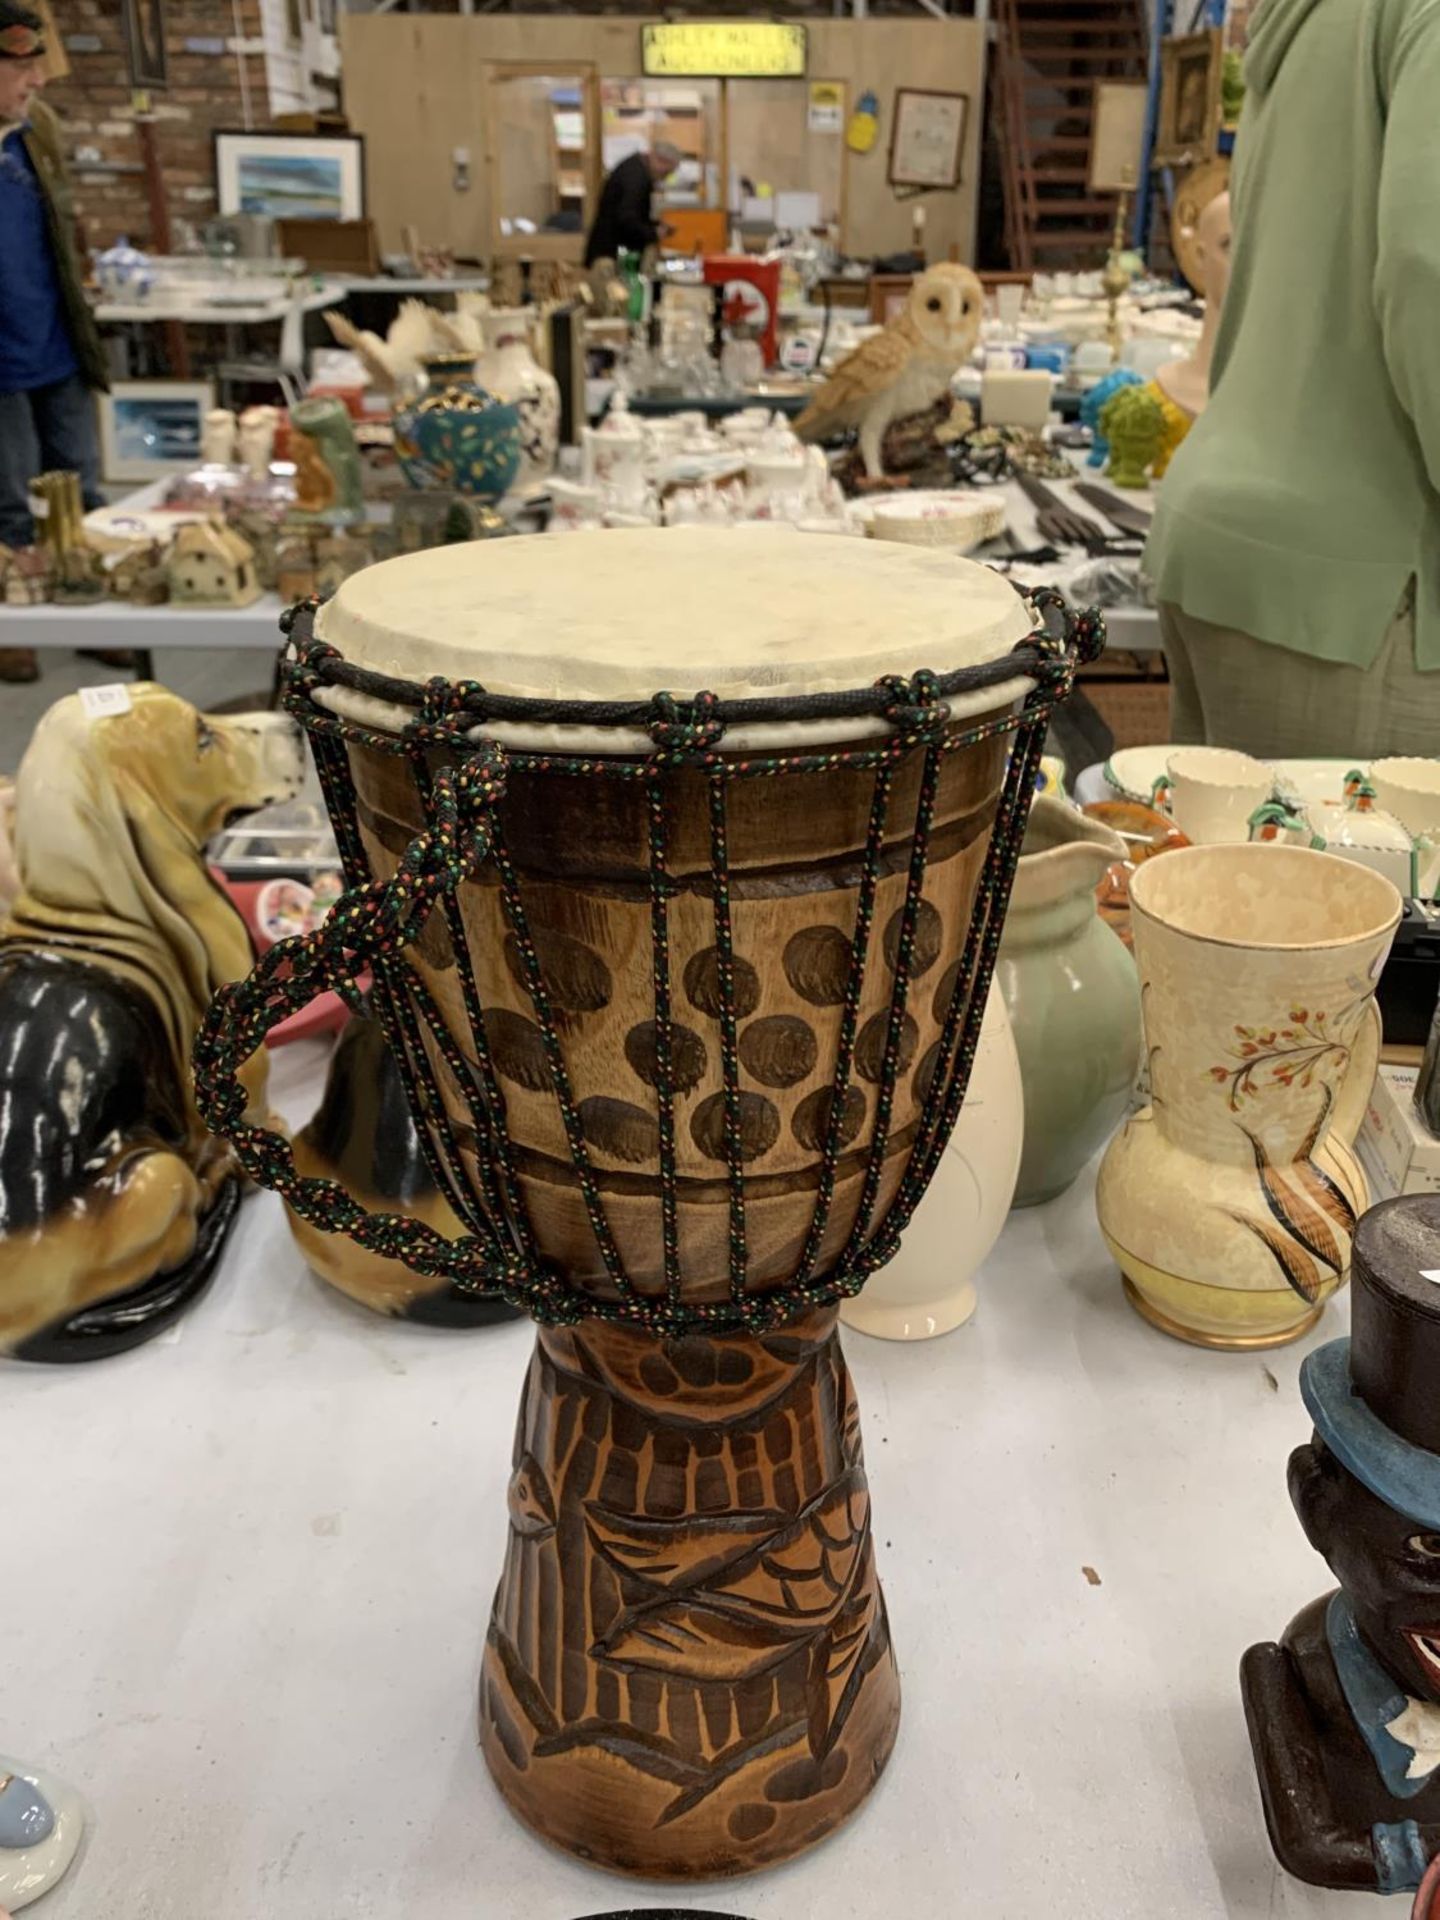 A WOODEN HAND CARVED BONGO DRUM